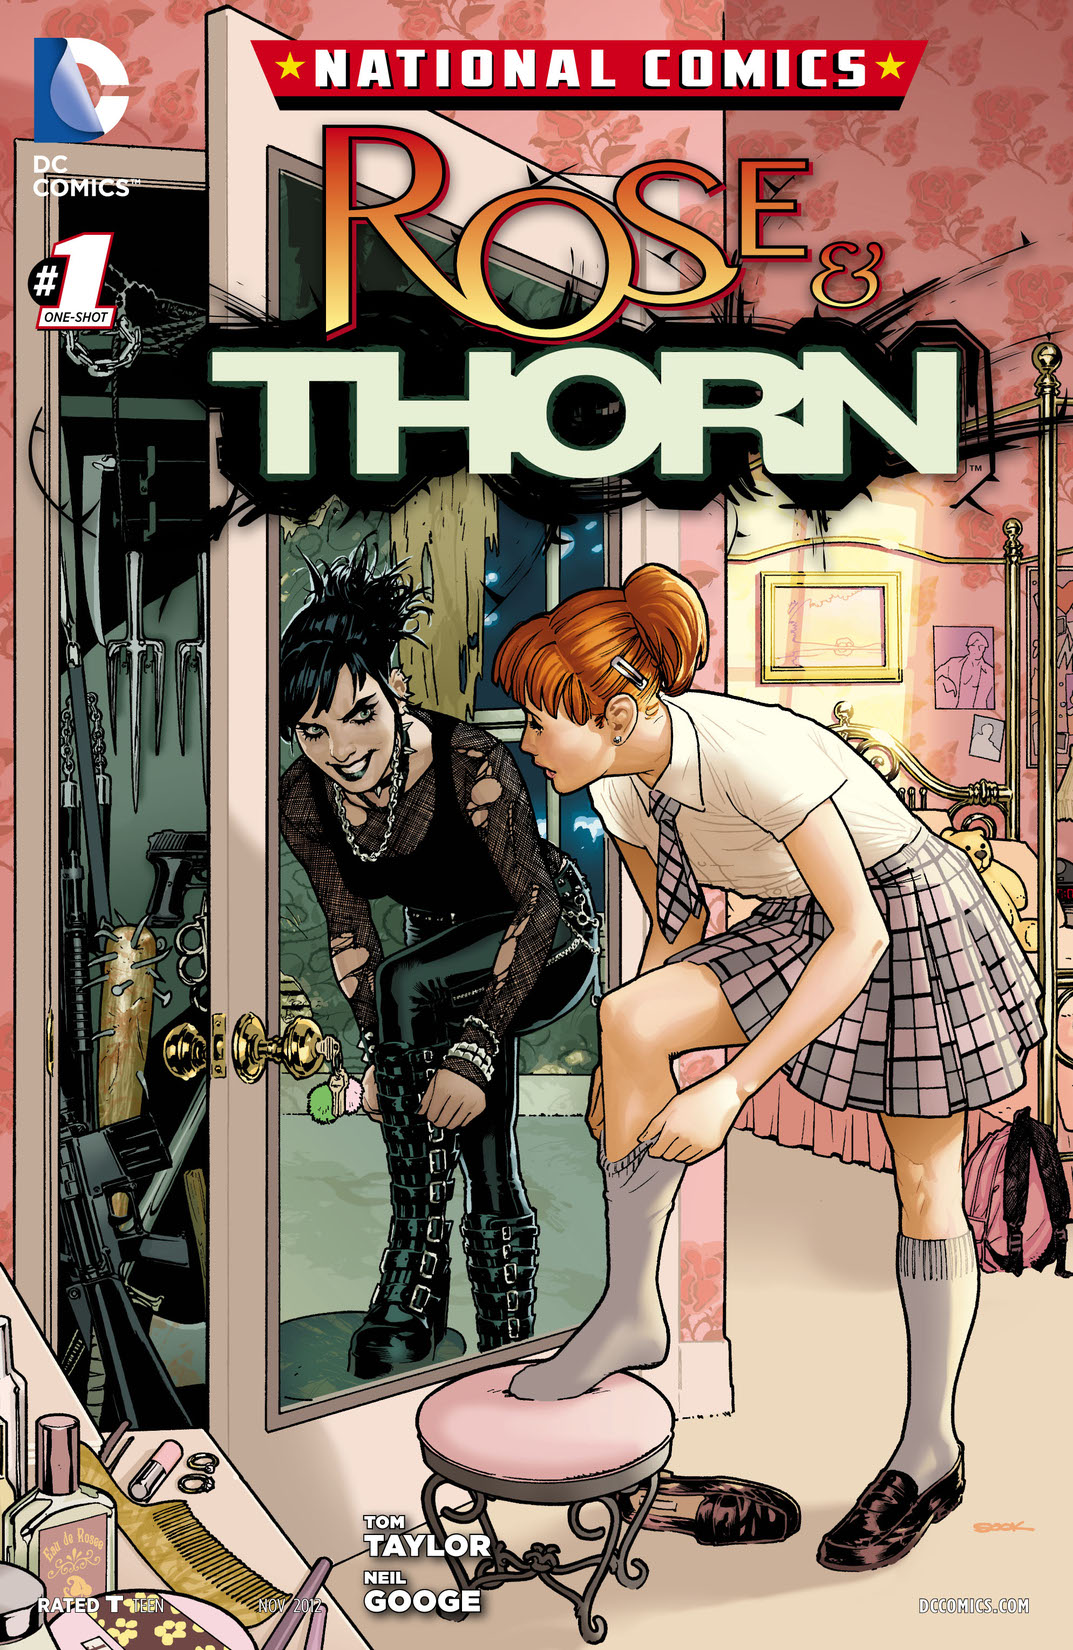 National Comics: Rose & Thorn #1 preview images